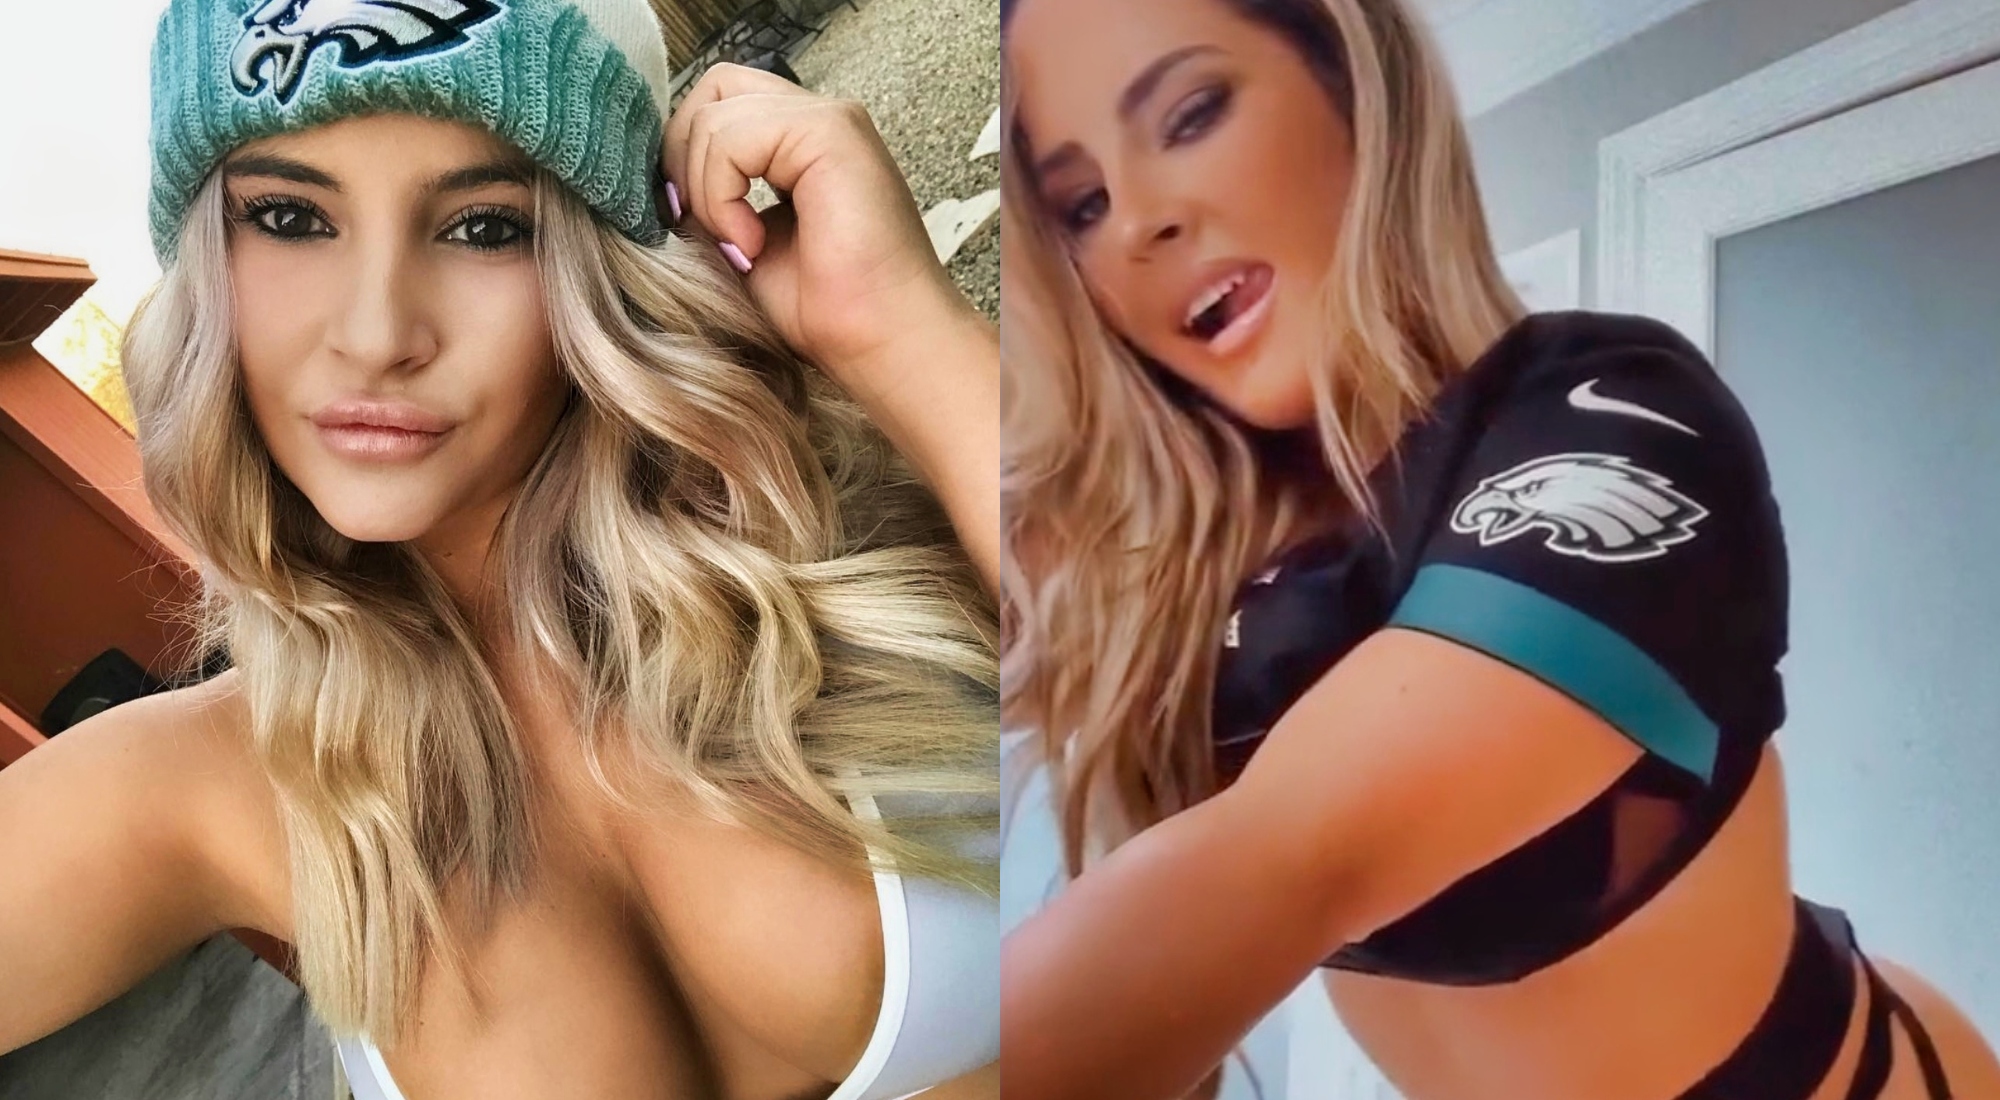 Eagles Super Fan Sammy Draper Fires Up Her Team For Super Bowl LVII With Extremely Racy Dance (VIDEO + PICS)